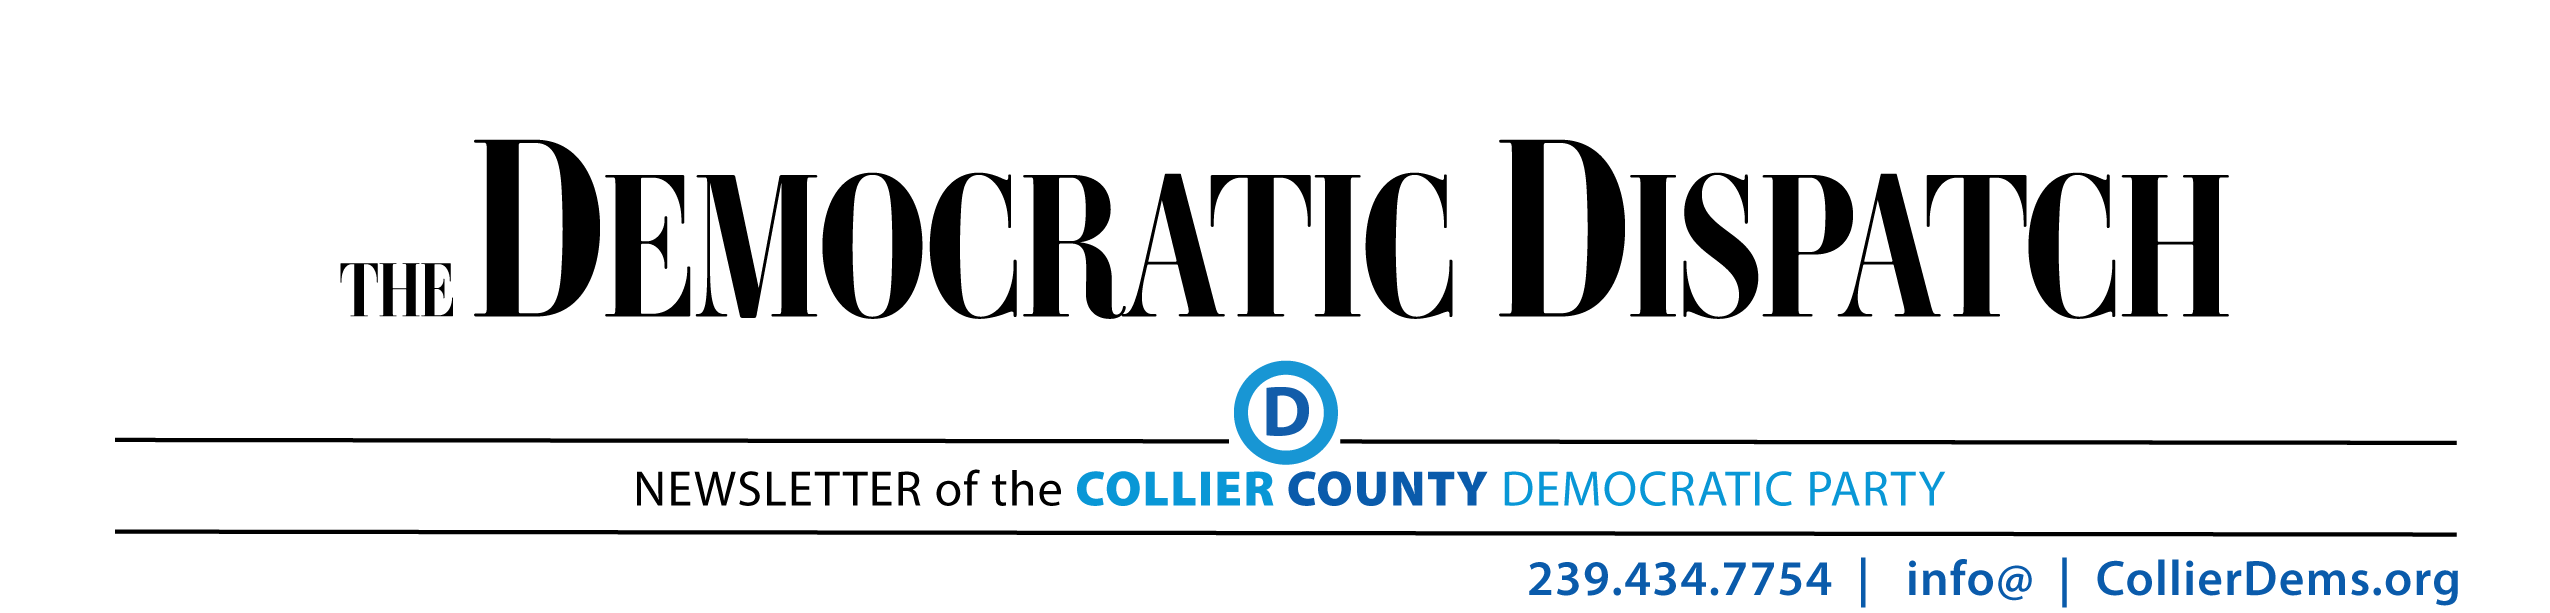 The Democratic Dispatch - Newsletter of the Collier County Democratic Party